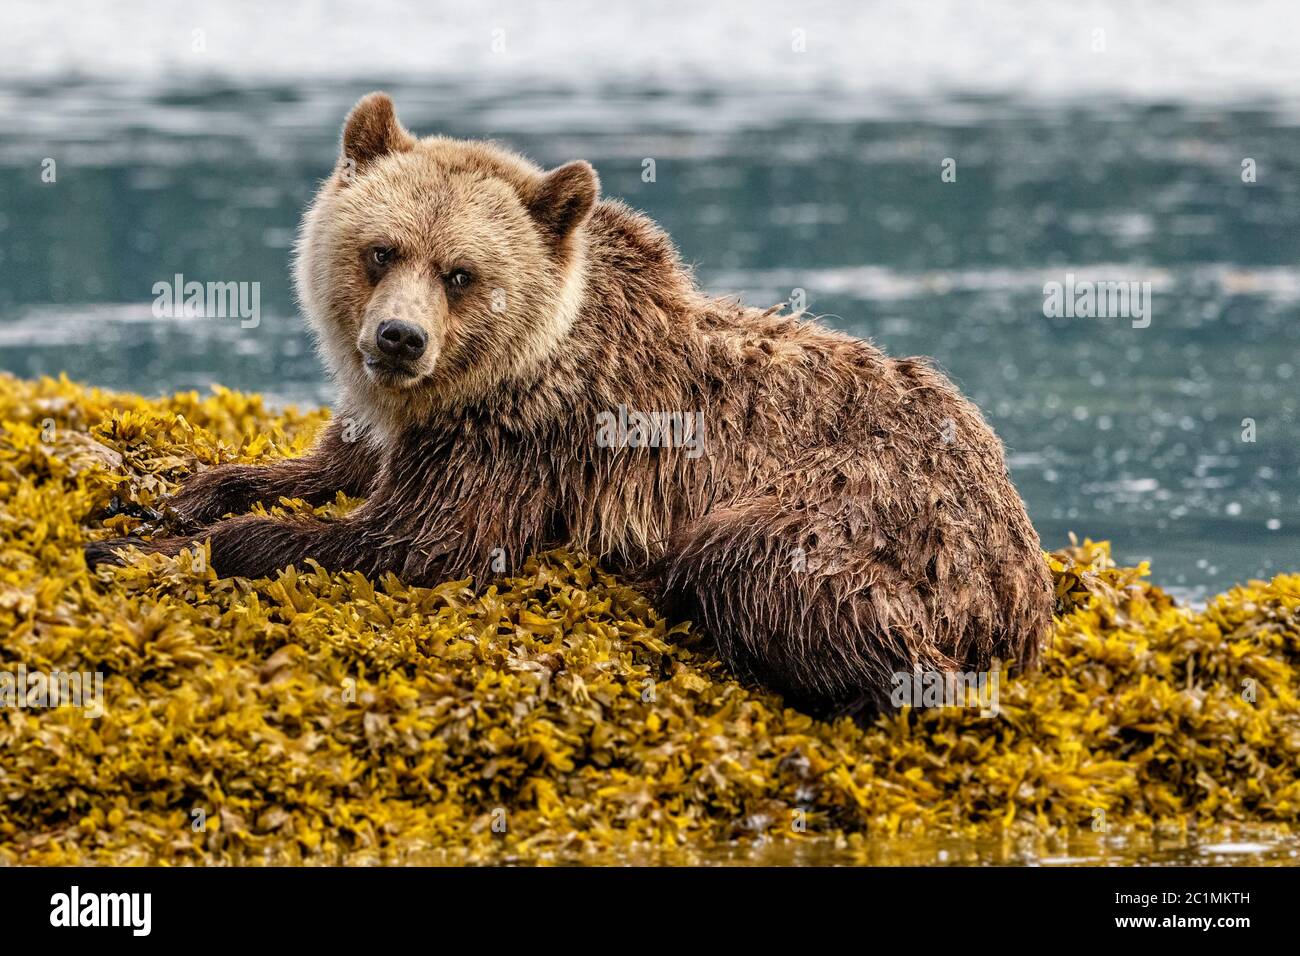 Grizzly bear cub resting in sea weed along the Knight Inlet shoreline during low tide, First Nations Territory, British Columbia, Canada. Stock Photo